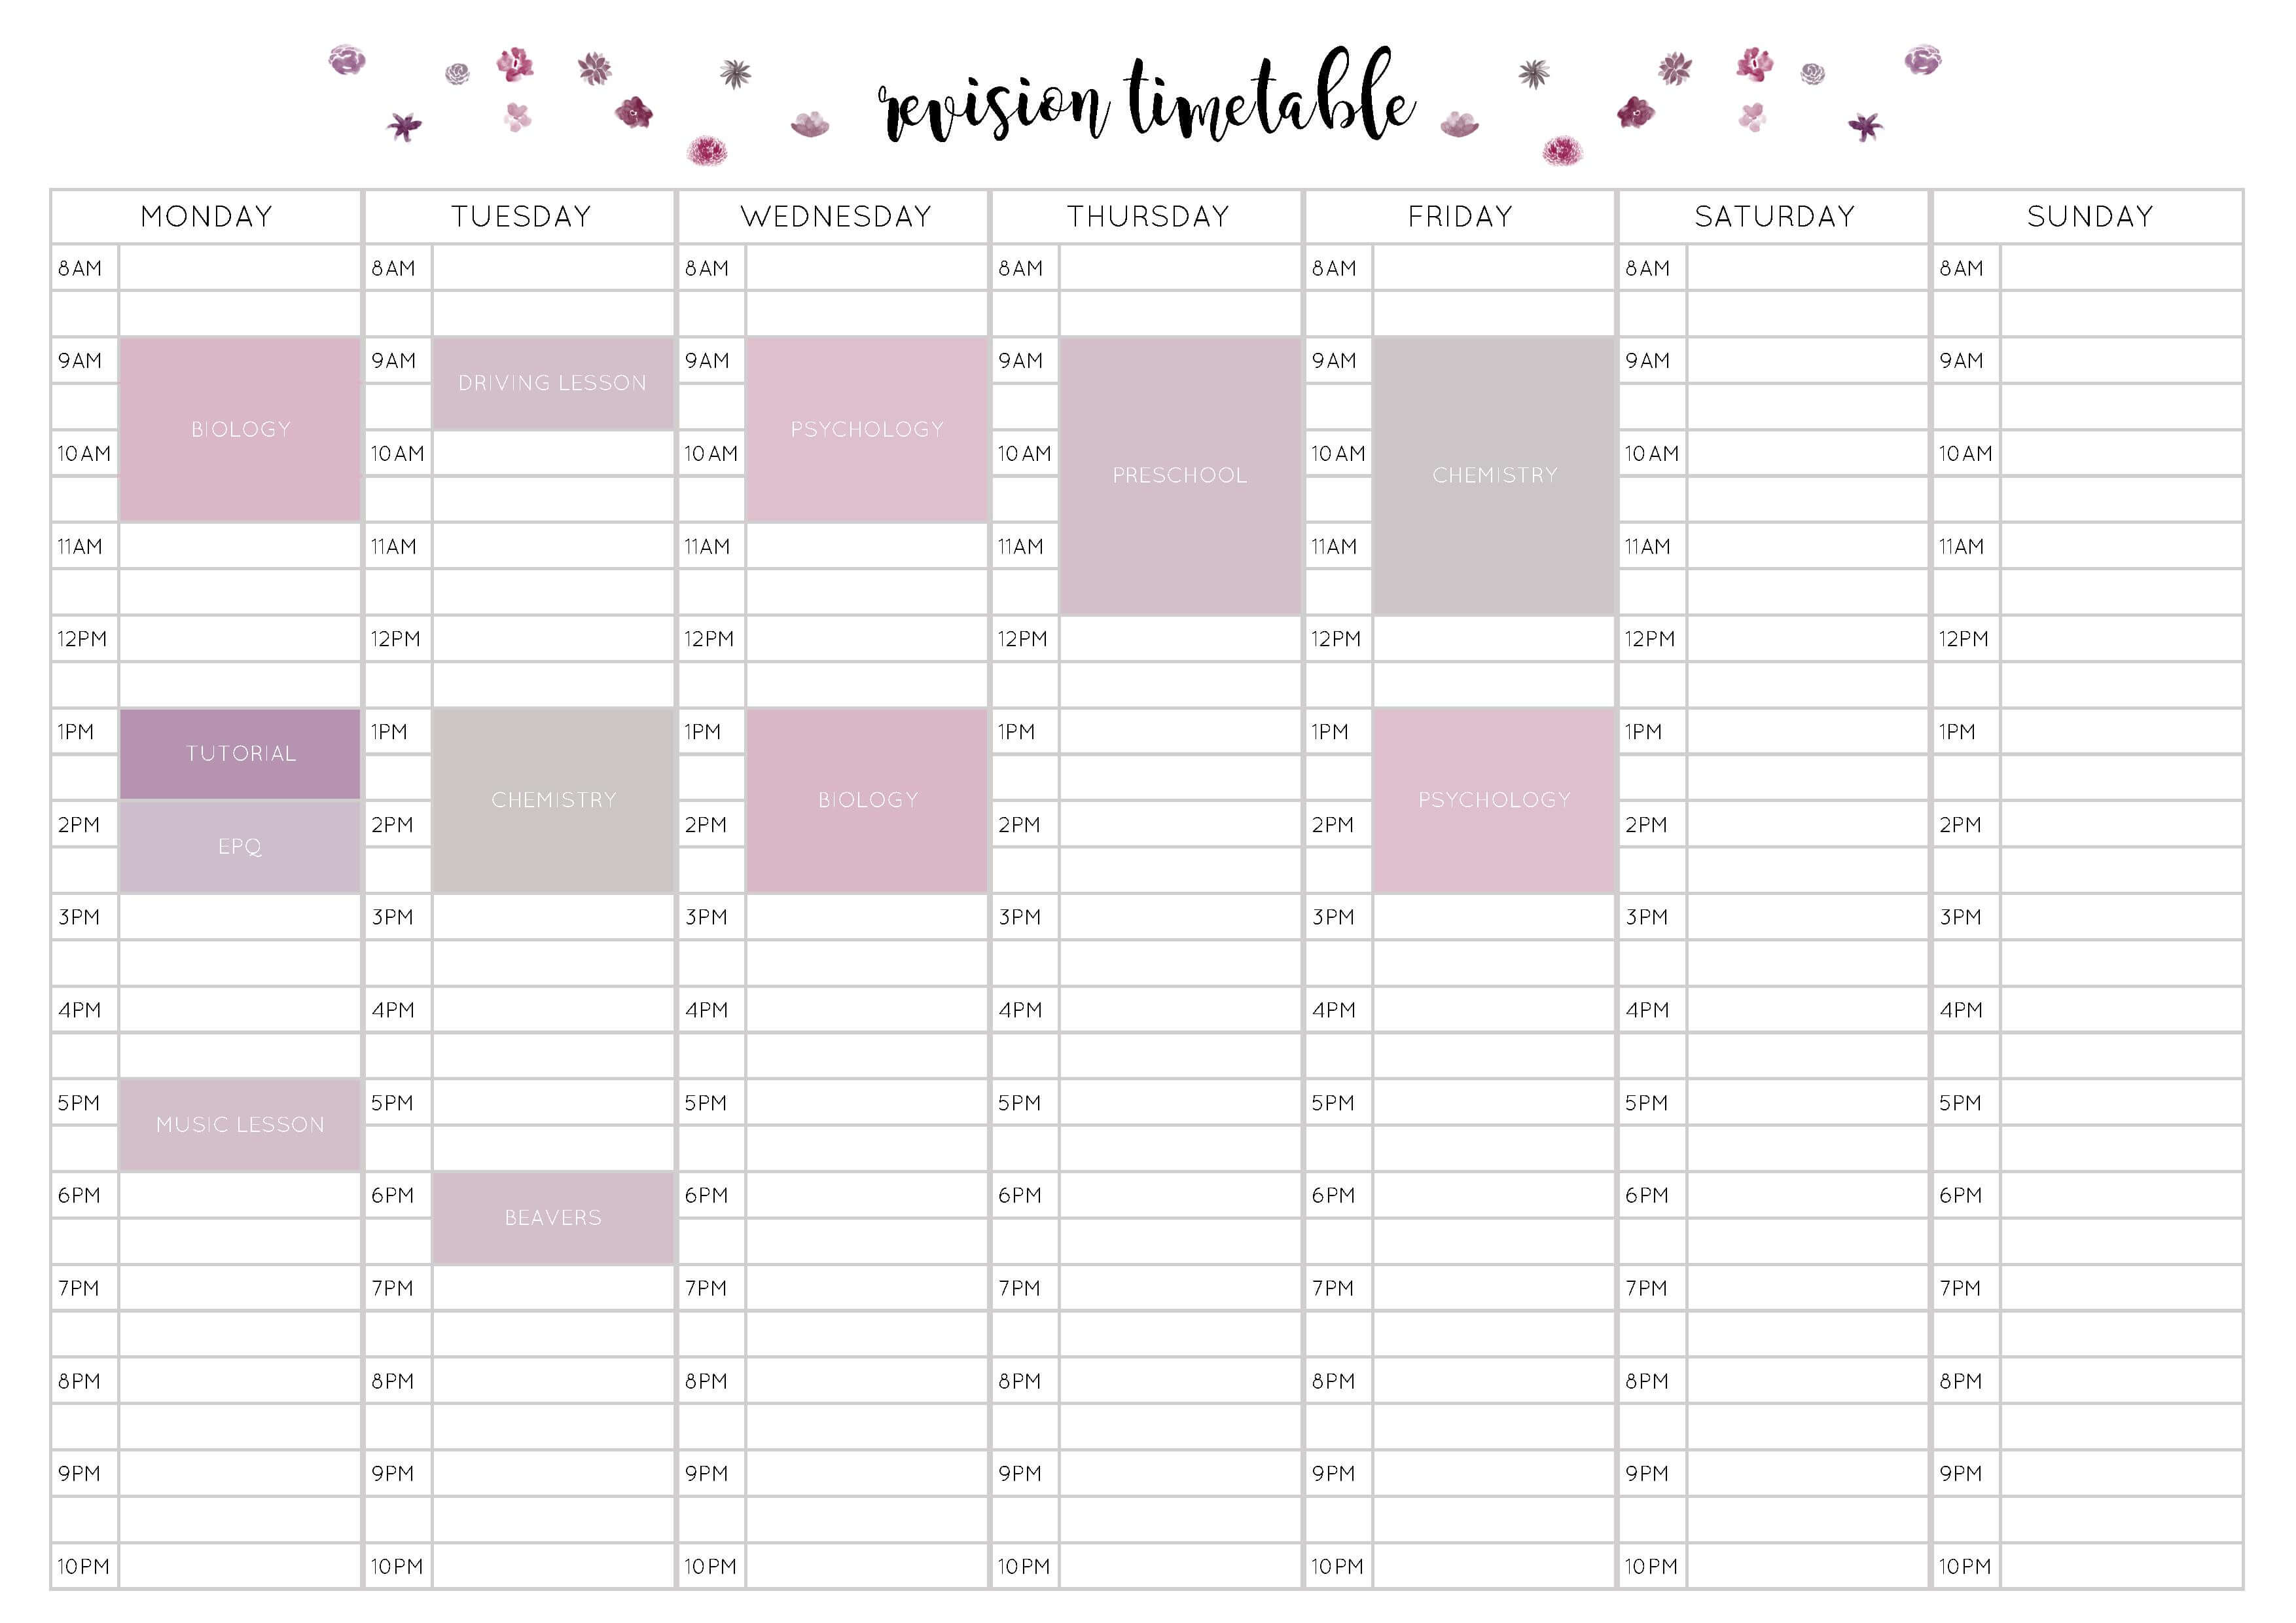 Free Revision Timetable Printable – Emily Studies For Blank Revision Timetable Template